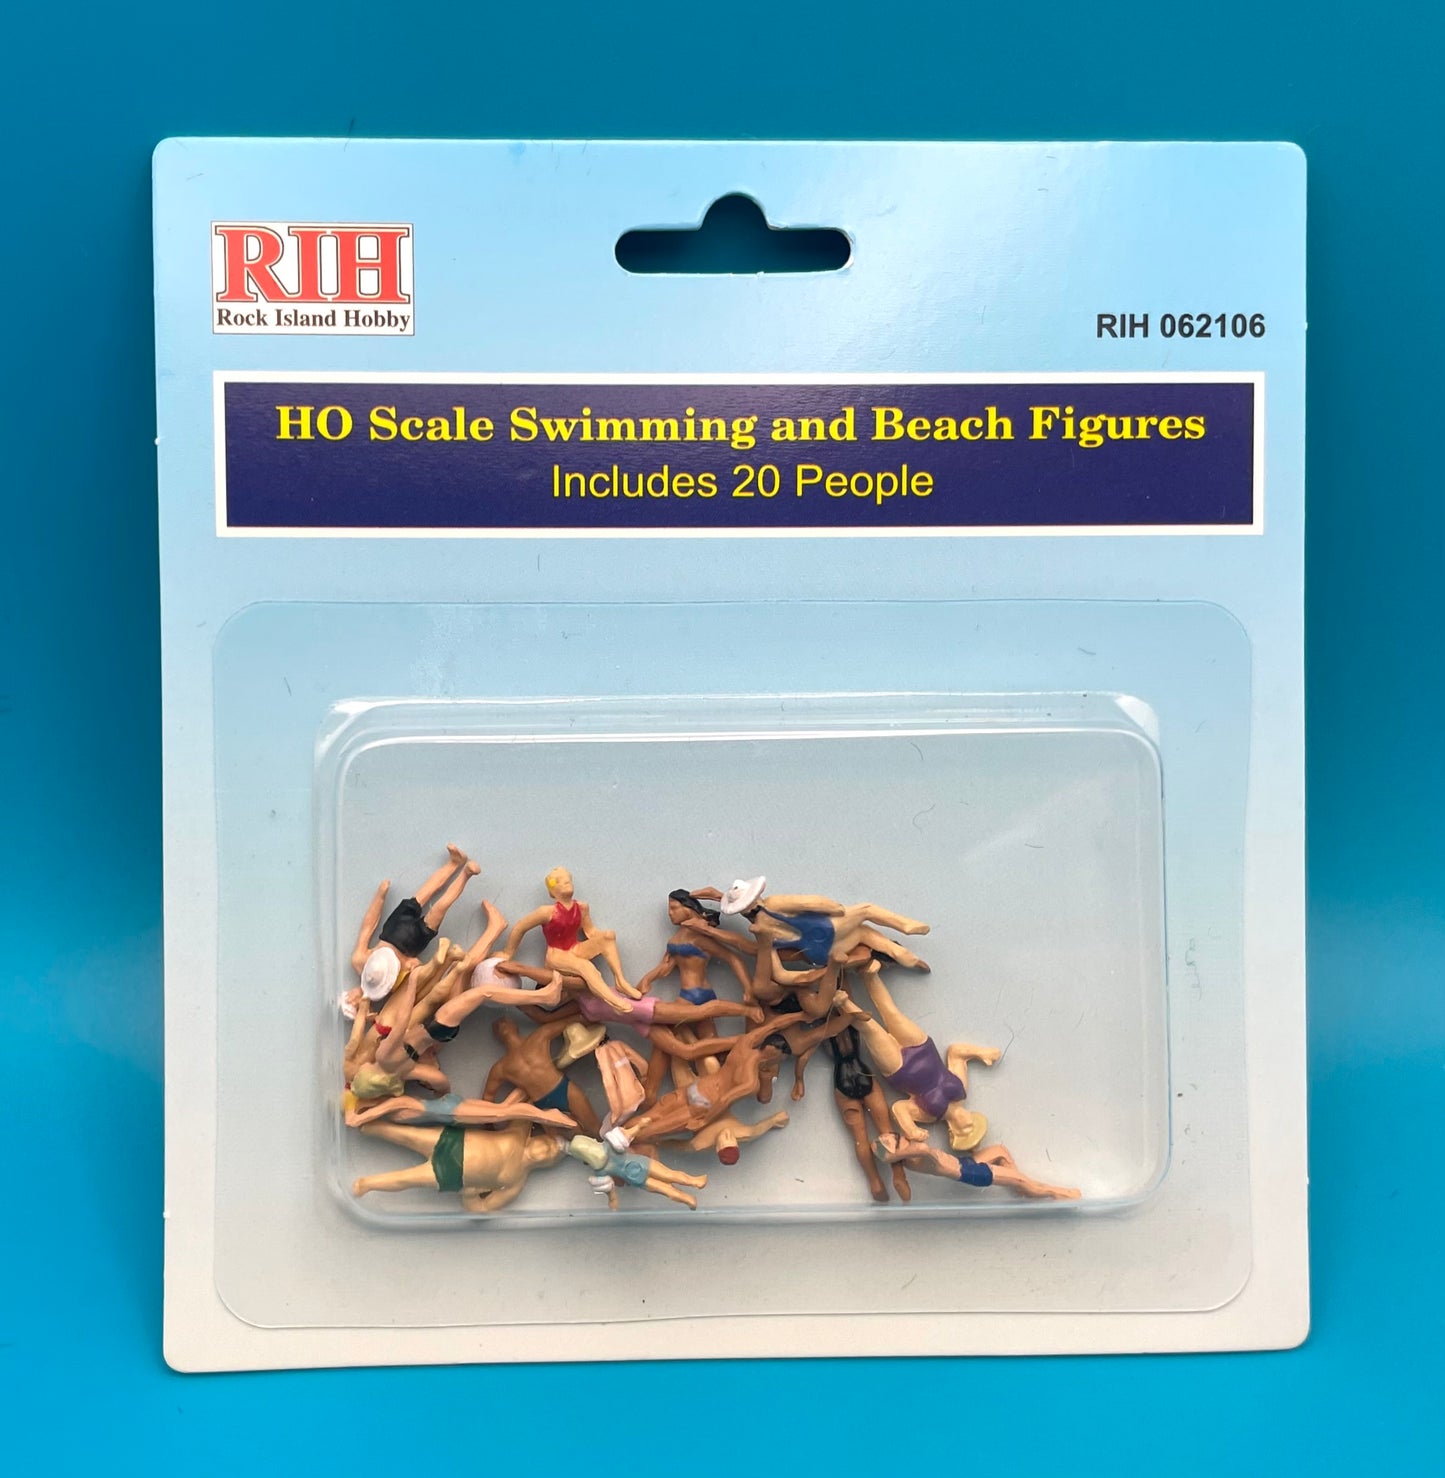 HO Scale Swimming and Beach Figures